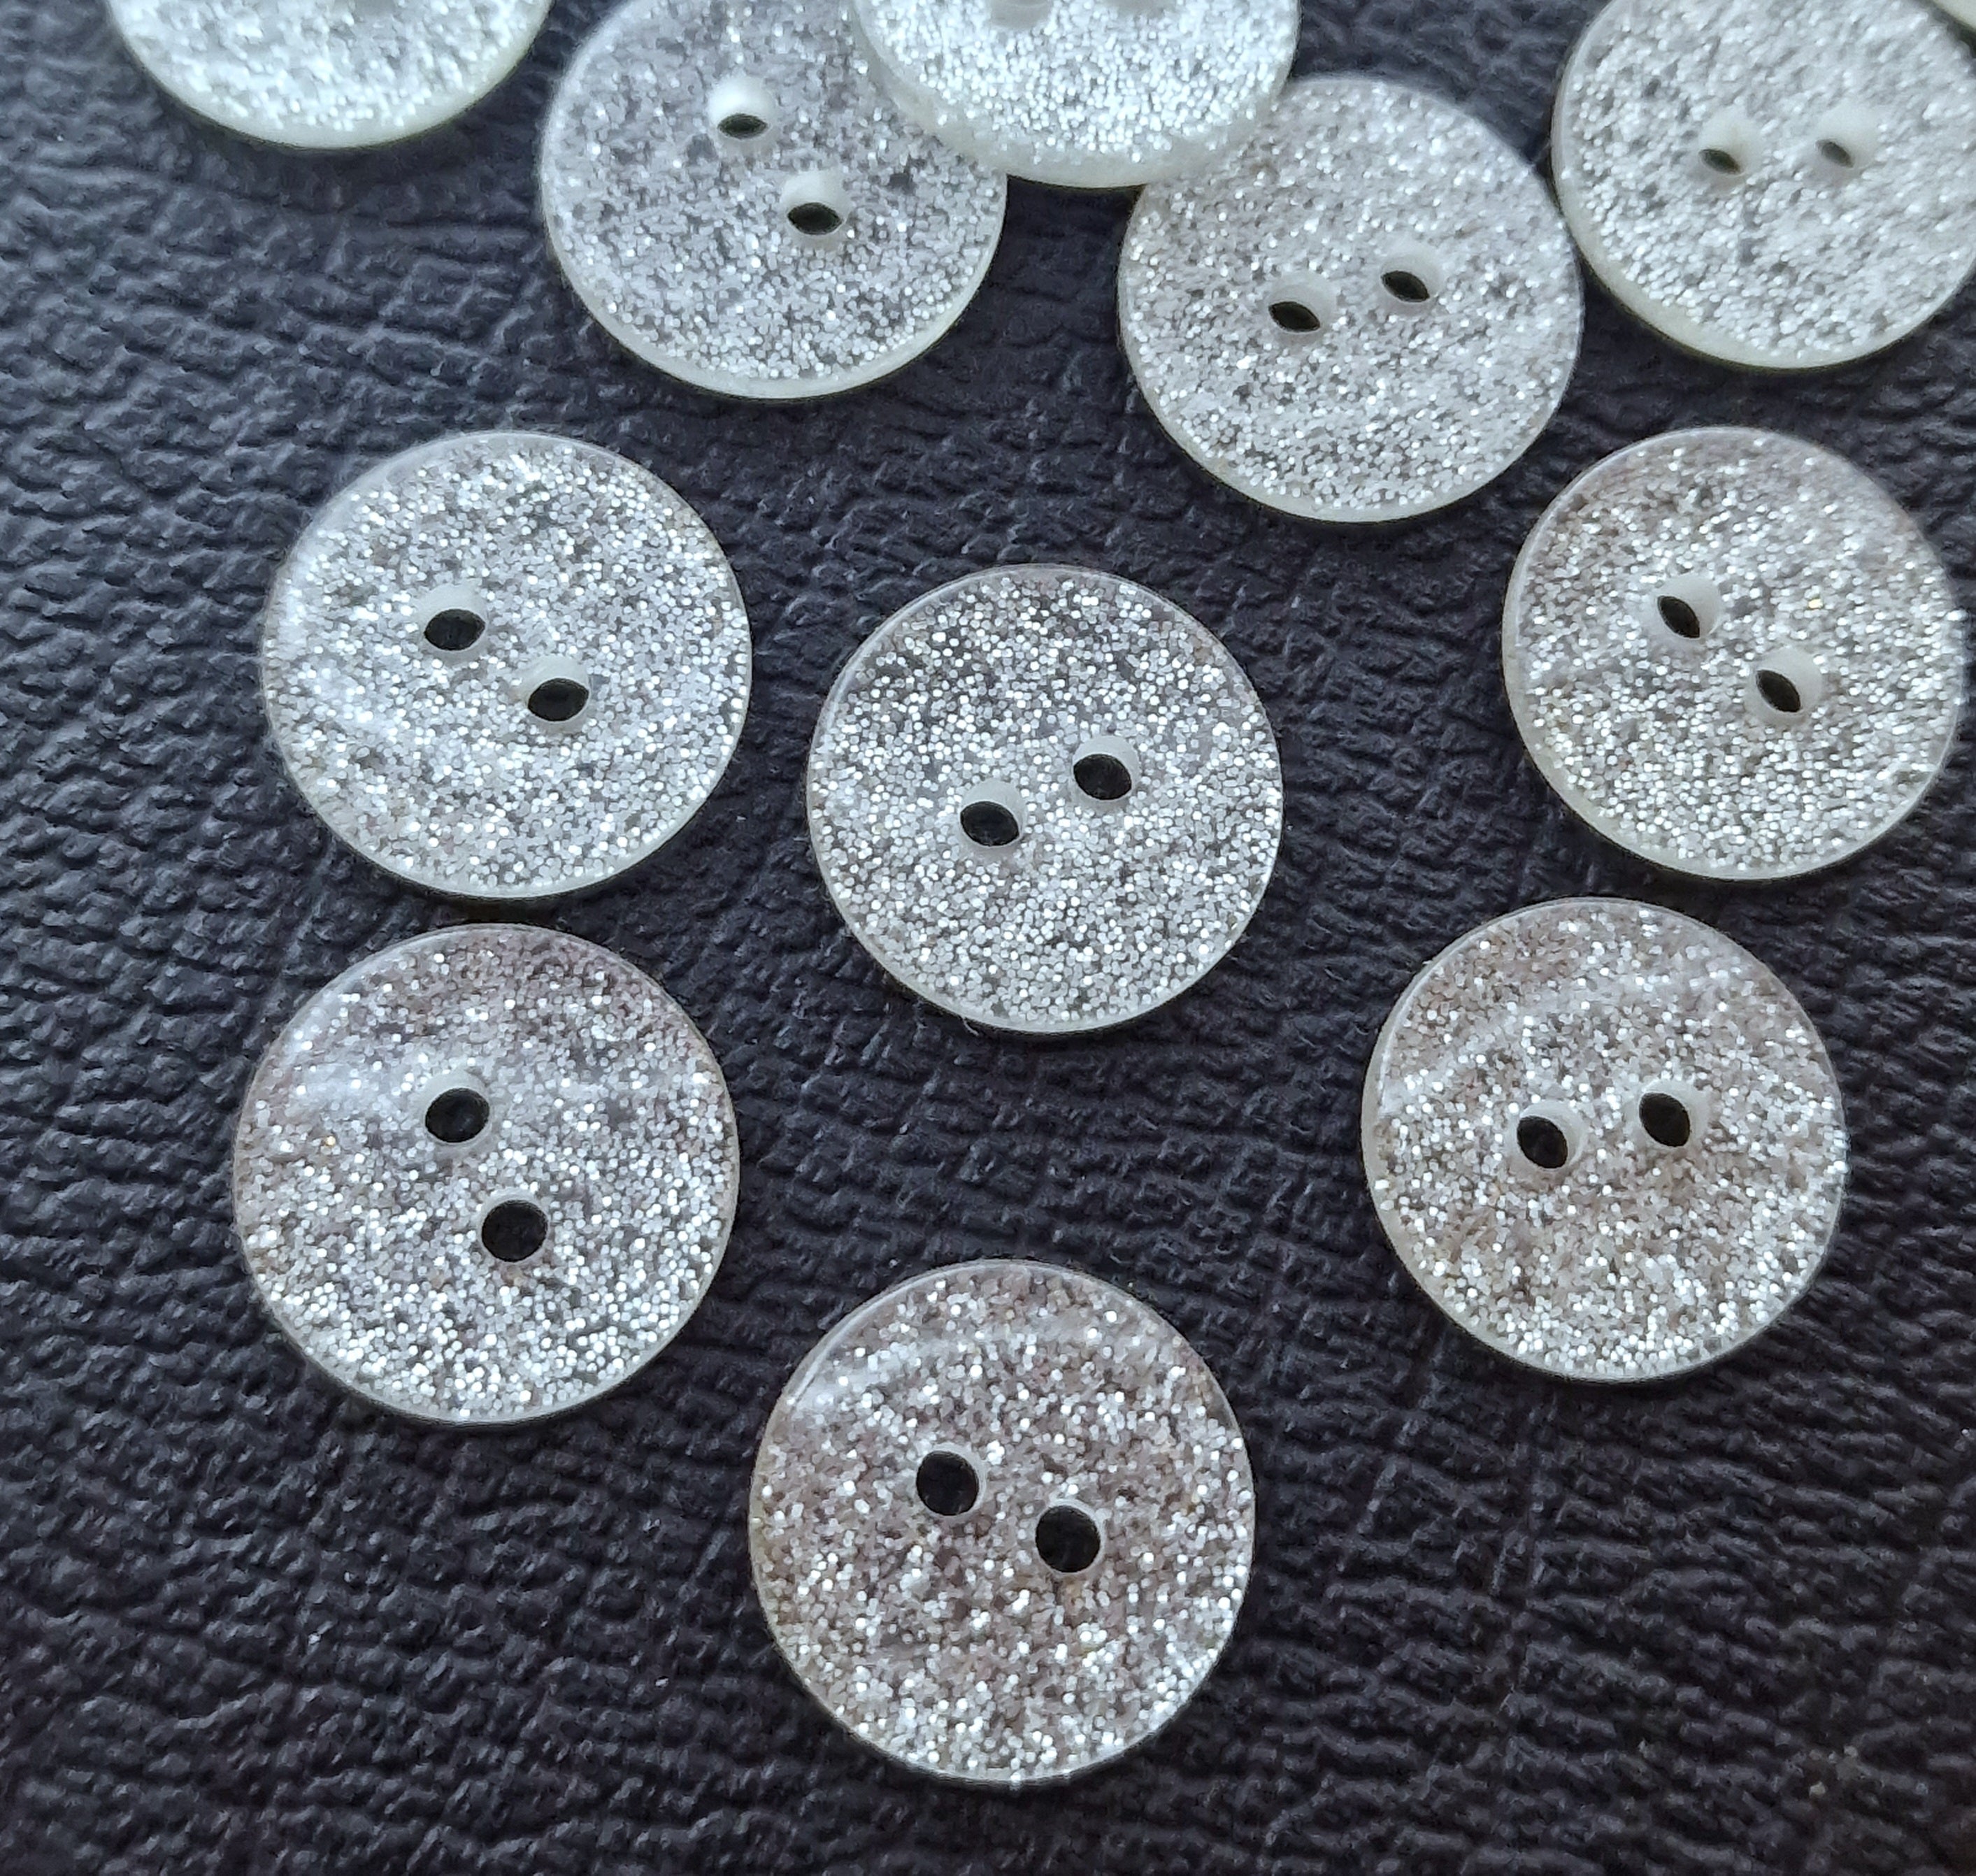 MajorCrafts 80pcs 9mm Clear Silver Glitter 2 Holes Round Sewing Resin Buttons